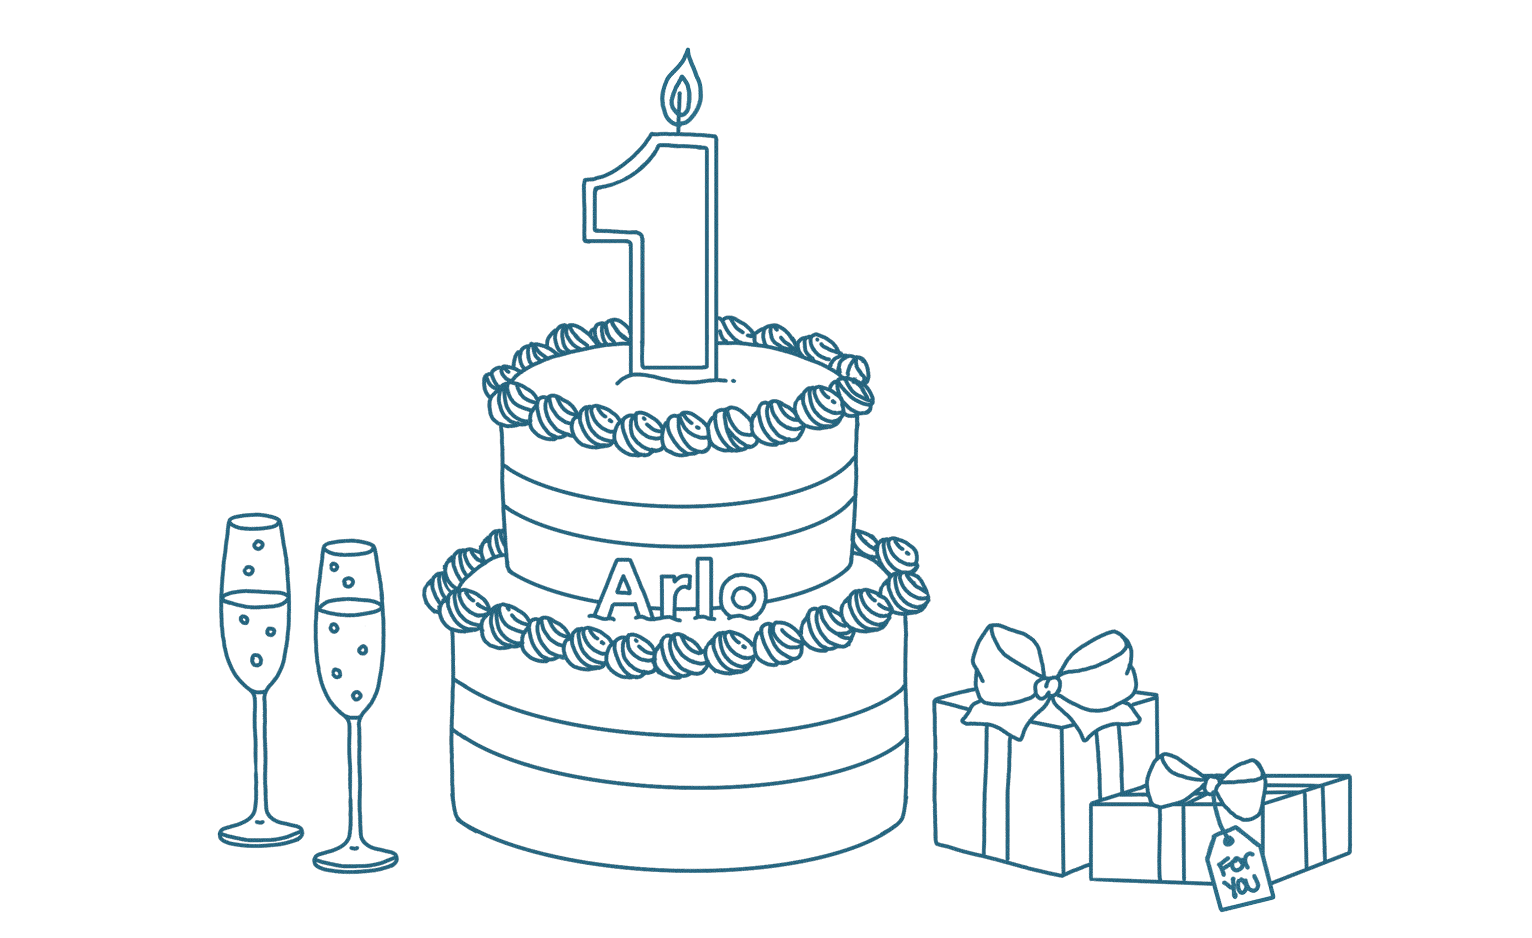 Illustrated graphic of champaign, a cake, and presents